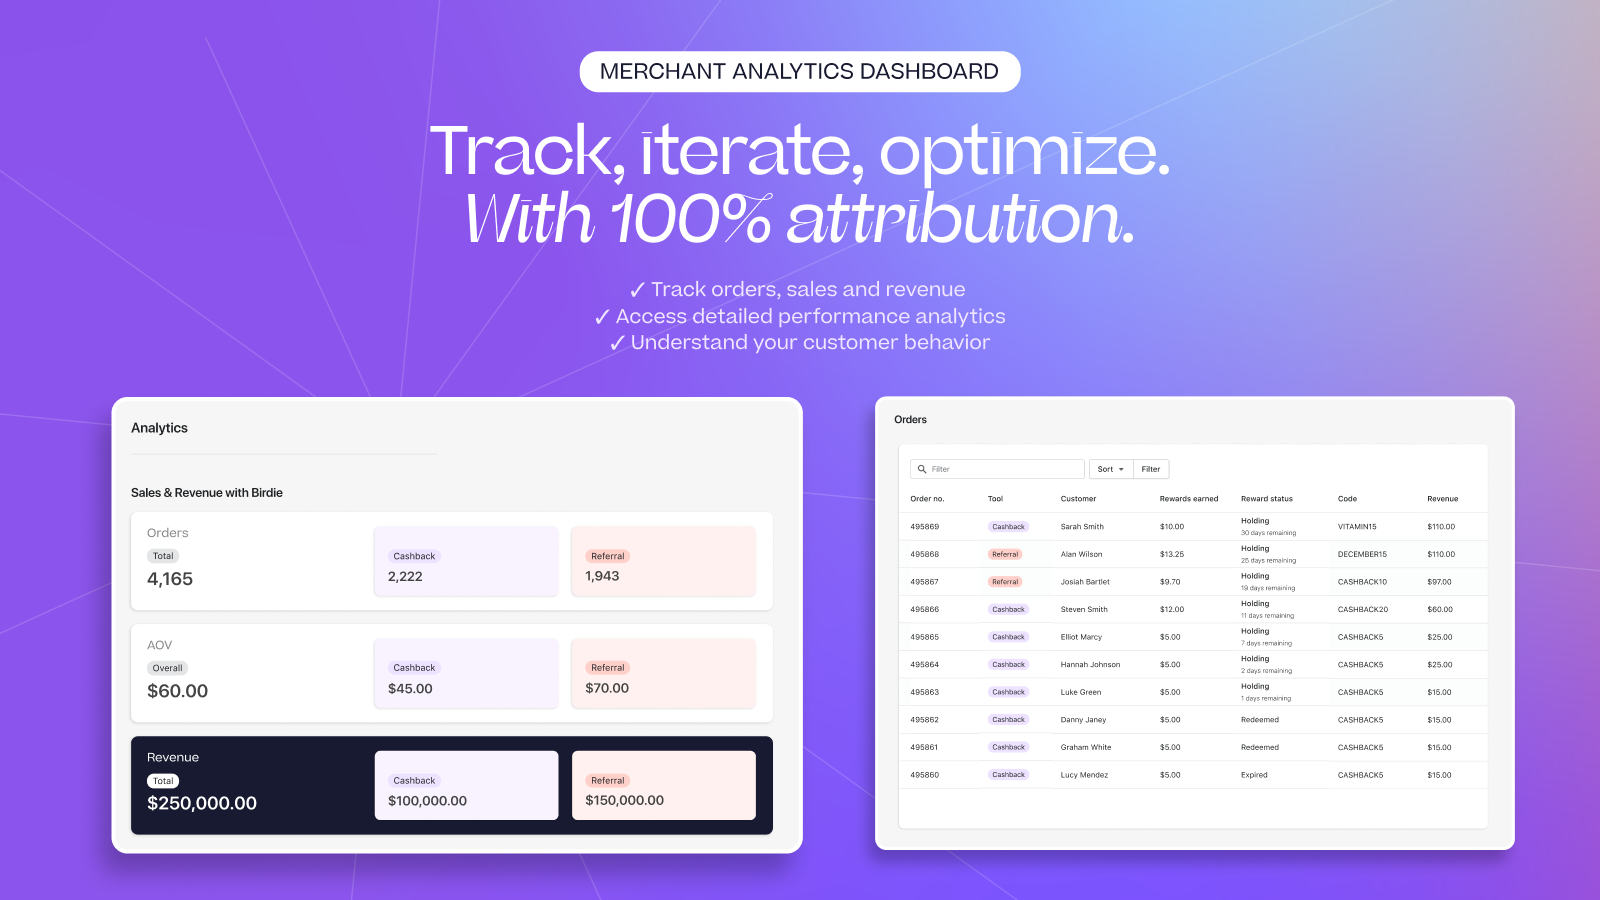 Track, iterate, optimize. With 100% attribution